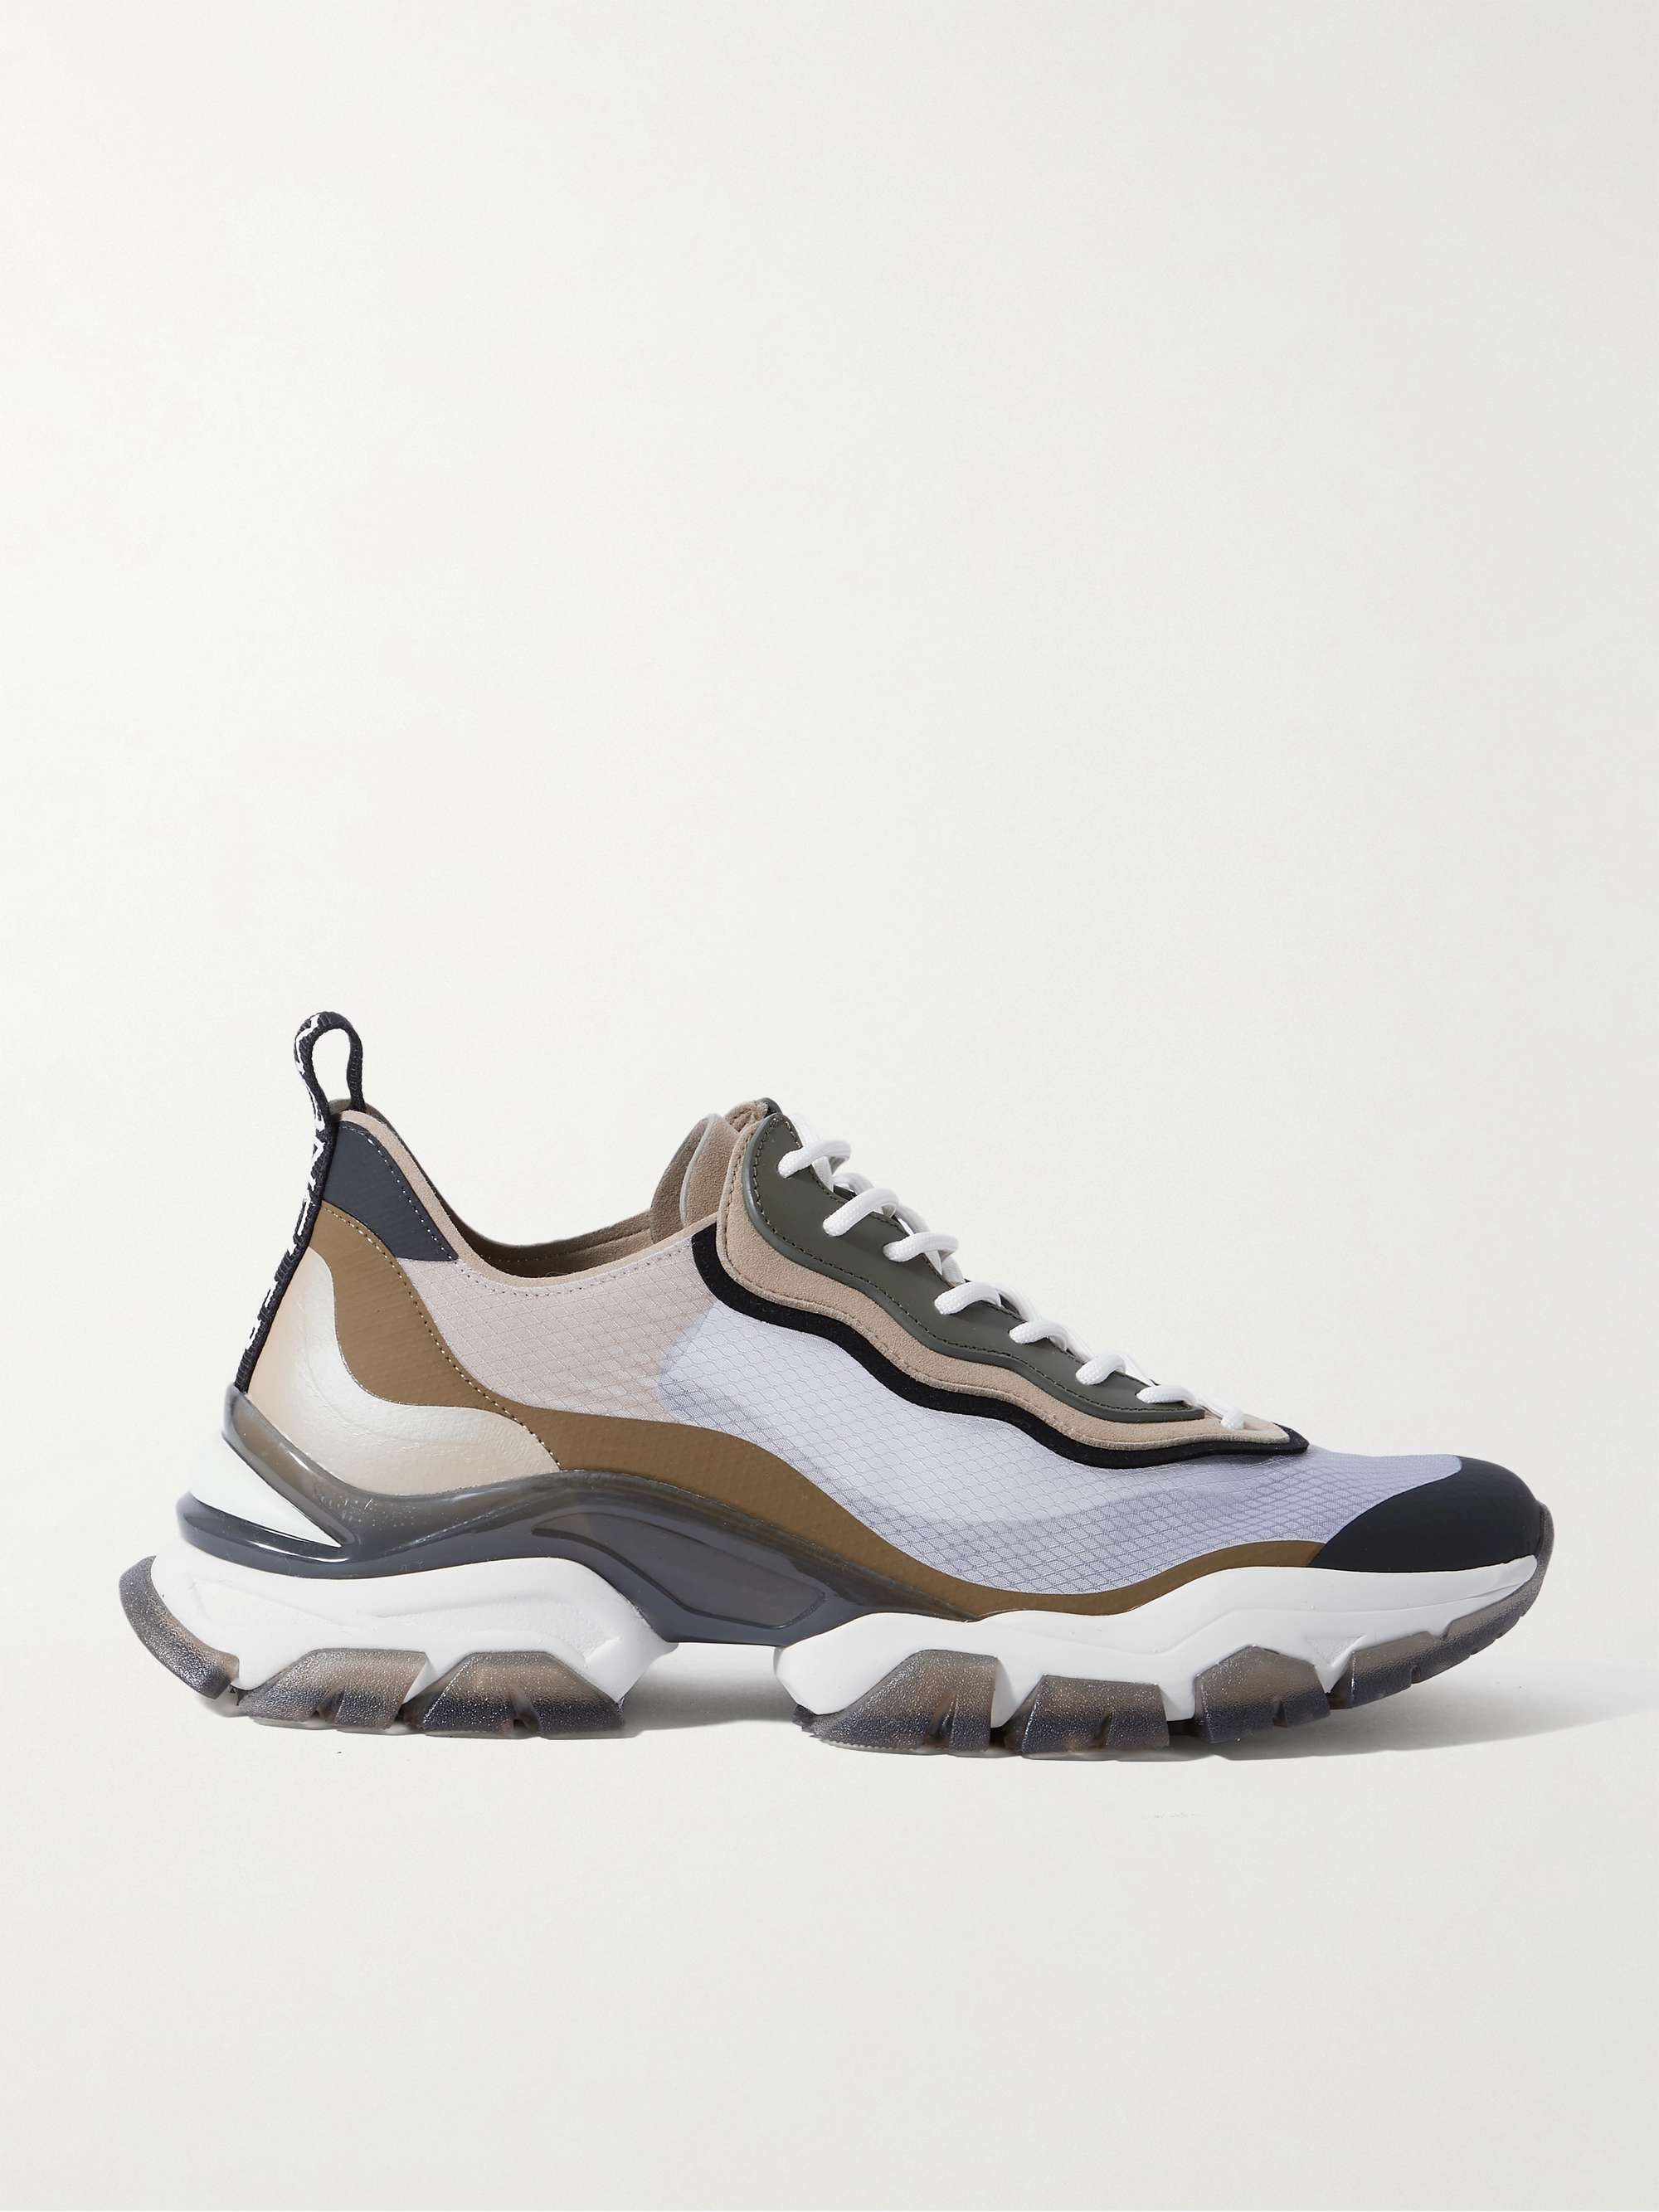 MONCLER Leave No Trace Leather, Suede and Ripstop Sneakers for Men | MR  PORTER